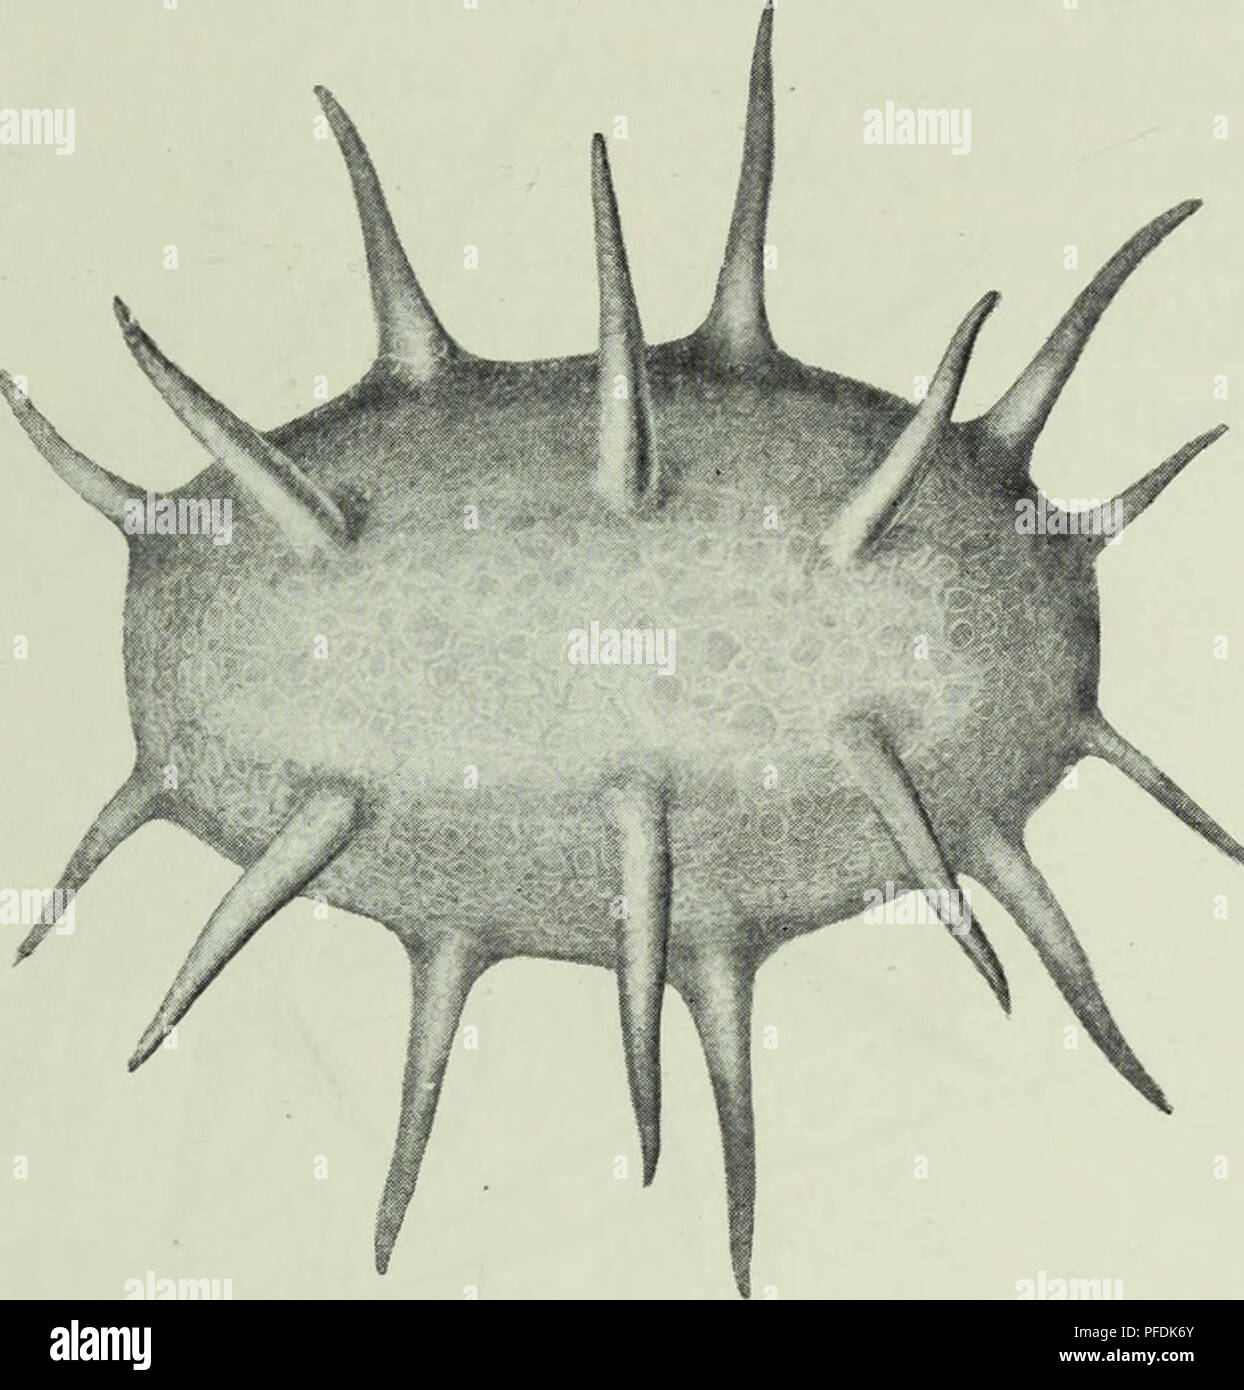 . The depths of the ocean; a general account of the modern science of oceanography based largely on the scientific researches of the Norwegian steamer Michael Sars in the North Atlantic. Oceanography. INVERTEBRATE BOTTOM FAUNA 541. Fig. 384. Deima fastosi/m, Theel. &quot; Michael Sars, Station 48. 1910, tarda, Pontophilus norvegicus, Pagurus pubescens, Calocaris macandrece, Geryon tridens. Worms: Aphrodite aculeata, Lcetmonice ftlicornis, Lumbrinereis fragilis. Brachi- opod ; Waldheimia septata (in large quantities). This list also might easily be extended. We see, therefore, that the fauna in Stock Photo